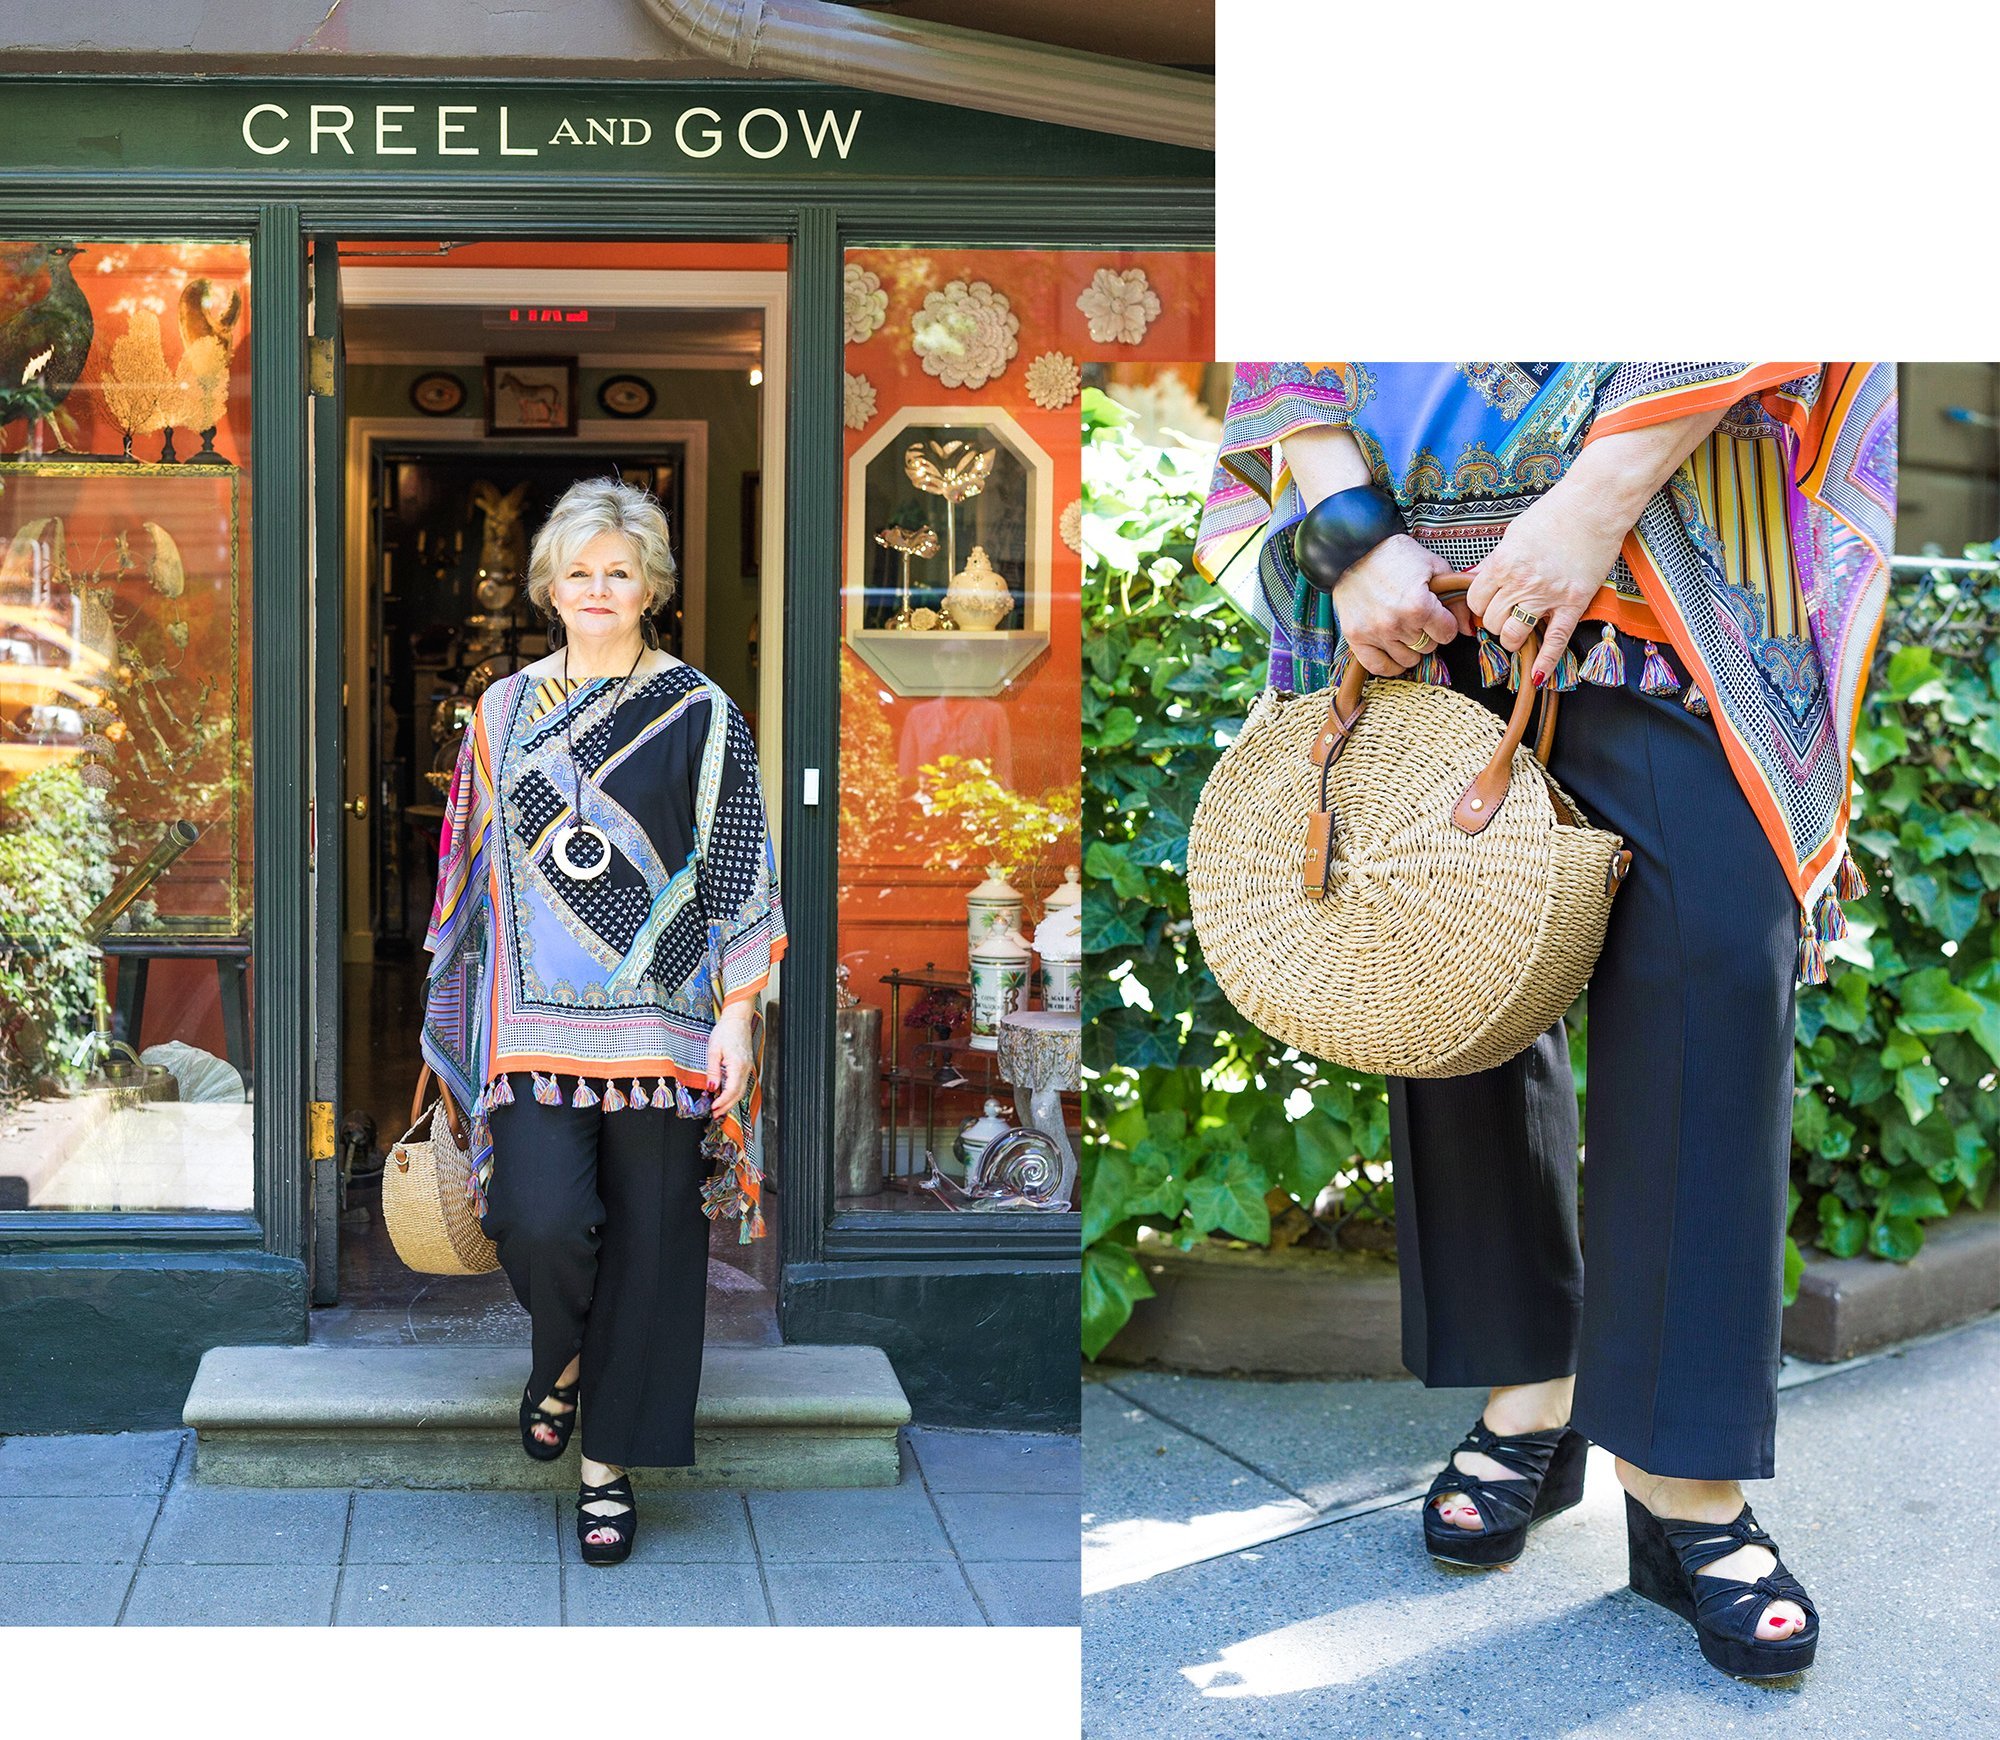 Charlotte wears our Desire Wedges in Black and carries the Capri Tote in Natural. Pictured in front of Creel and Gow.